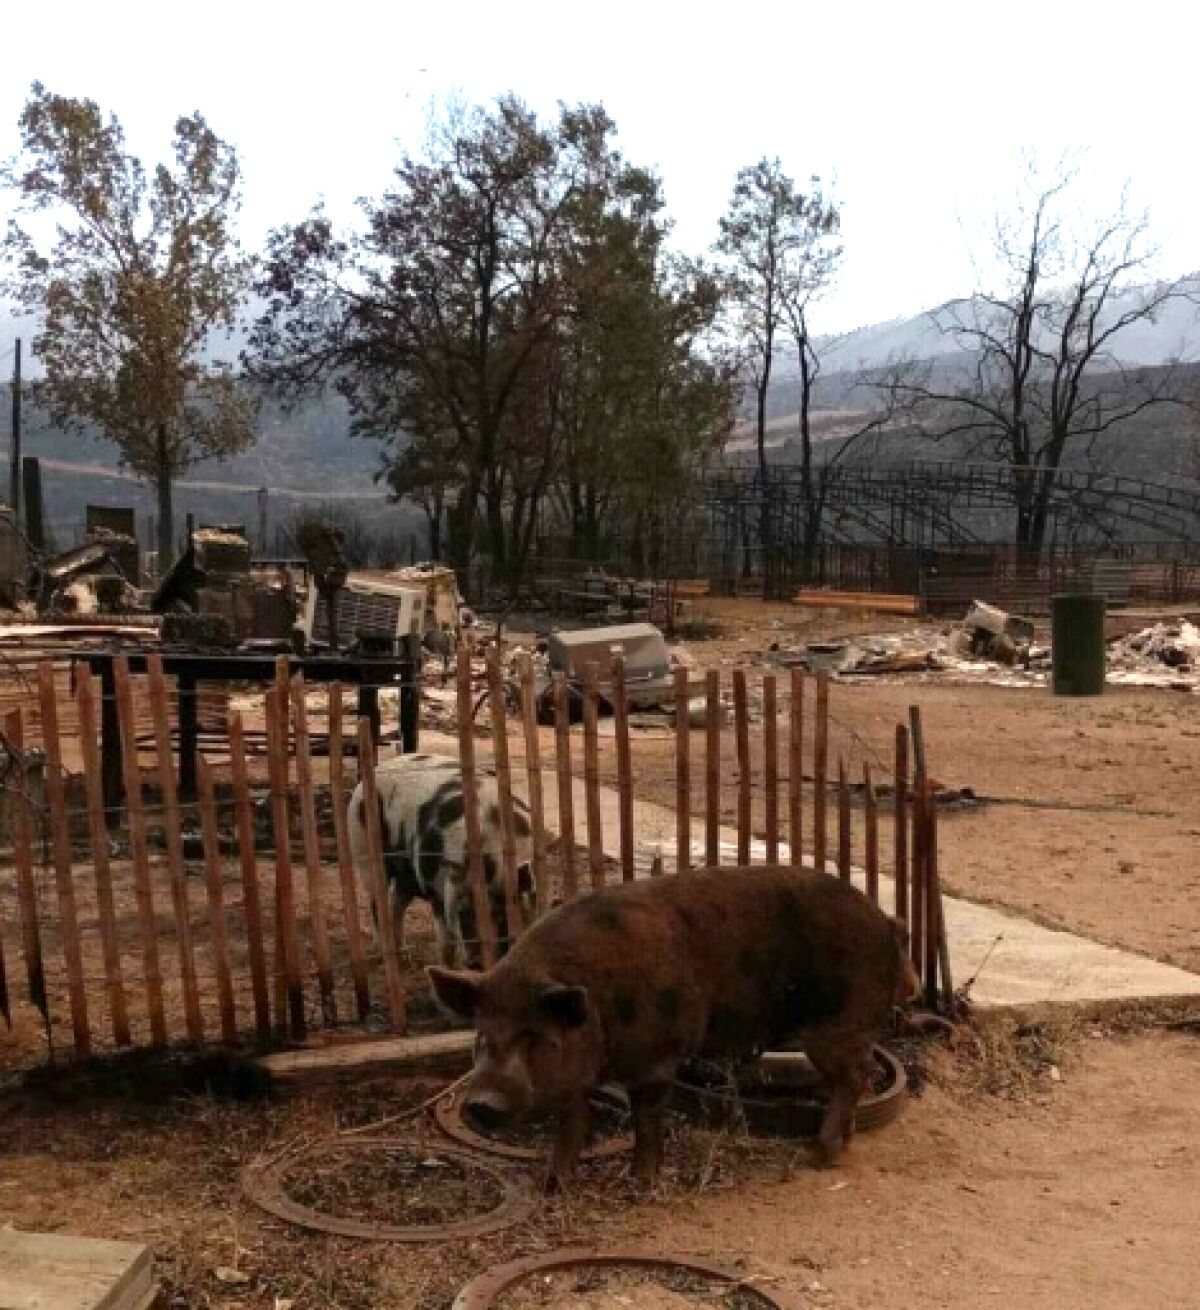 Mike Snook's pigs, Biscuit and Gravy, survived the Beckwourth Complex fire.